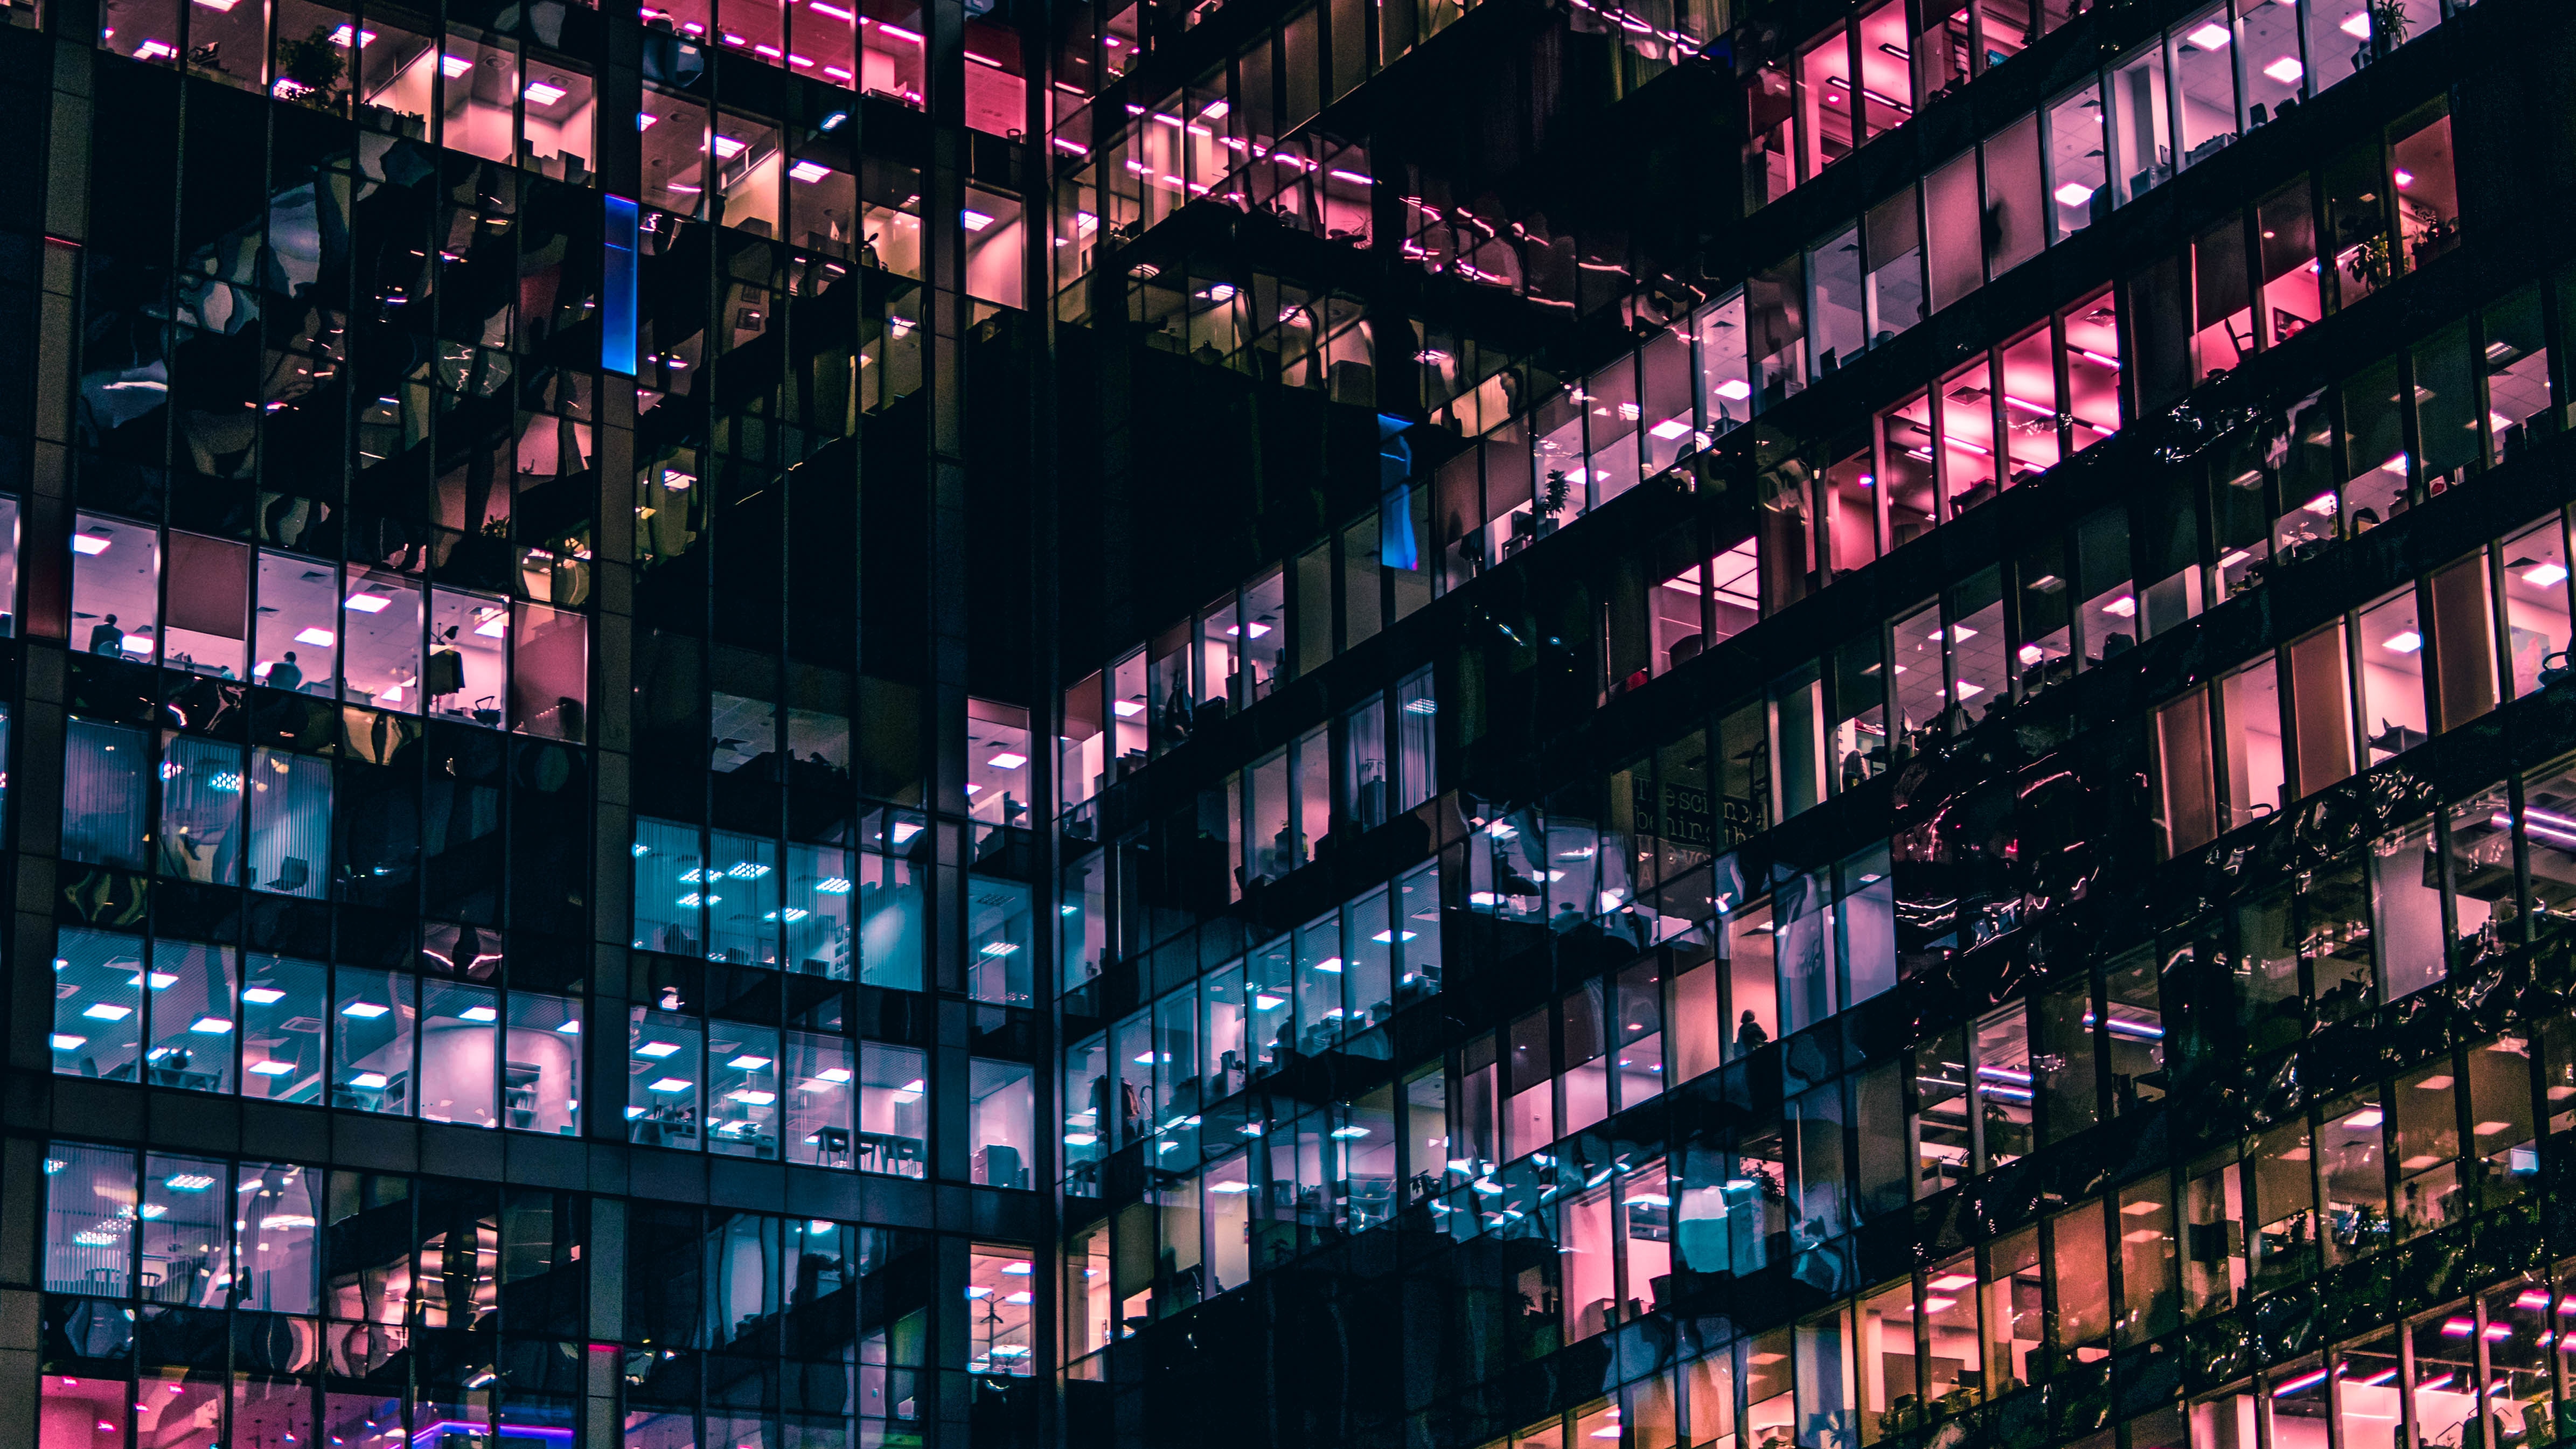 4782x2690 business, office, facade, building, city, perspective, geometry, architecture, color, urban, PNG image, archilover, geometric, shape, line, light, neon, skyscraper, night, window, neoncity Gallery HD Wallpaper